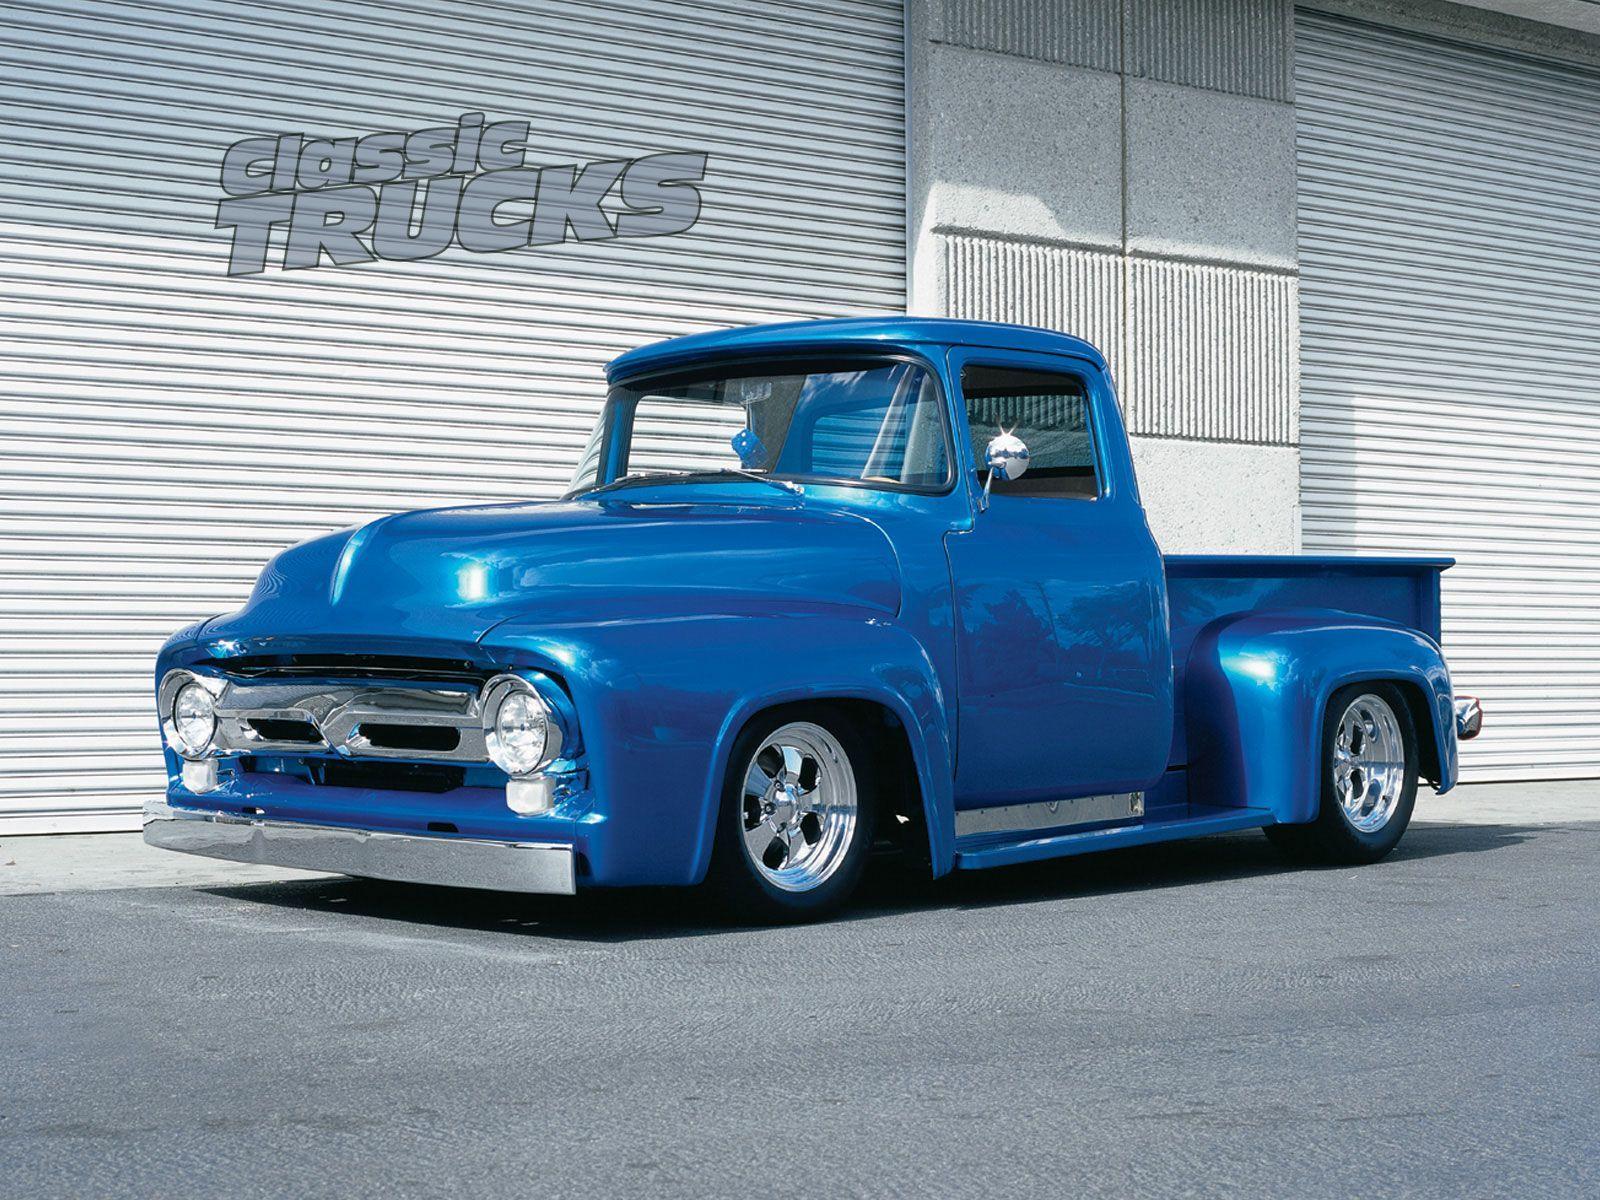 OMG Ford F 100 Ford Pick Up. I Give It An A++++. Classic Ford Trucks, Classic Trucks, Classic Pickup Trucks